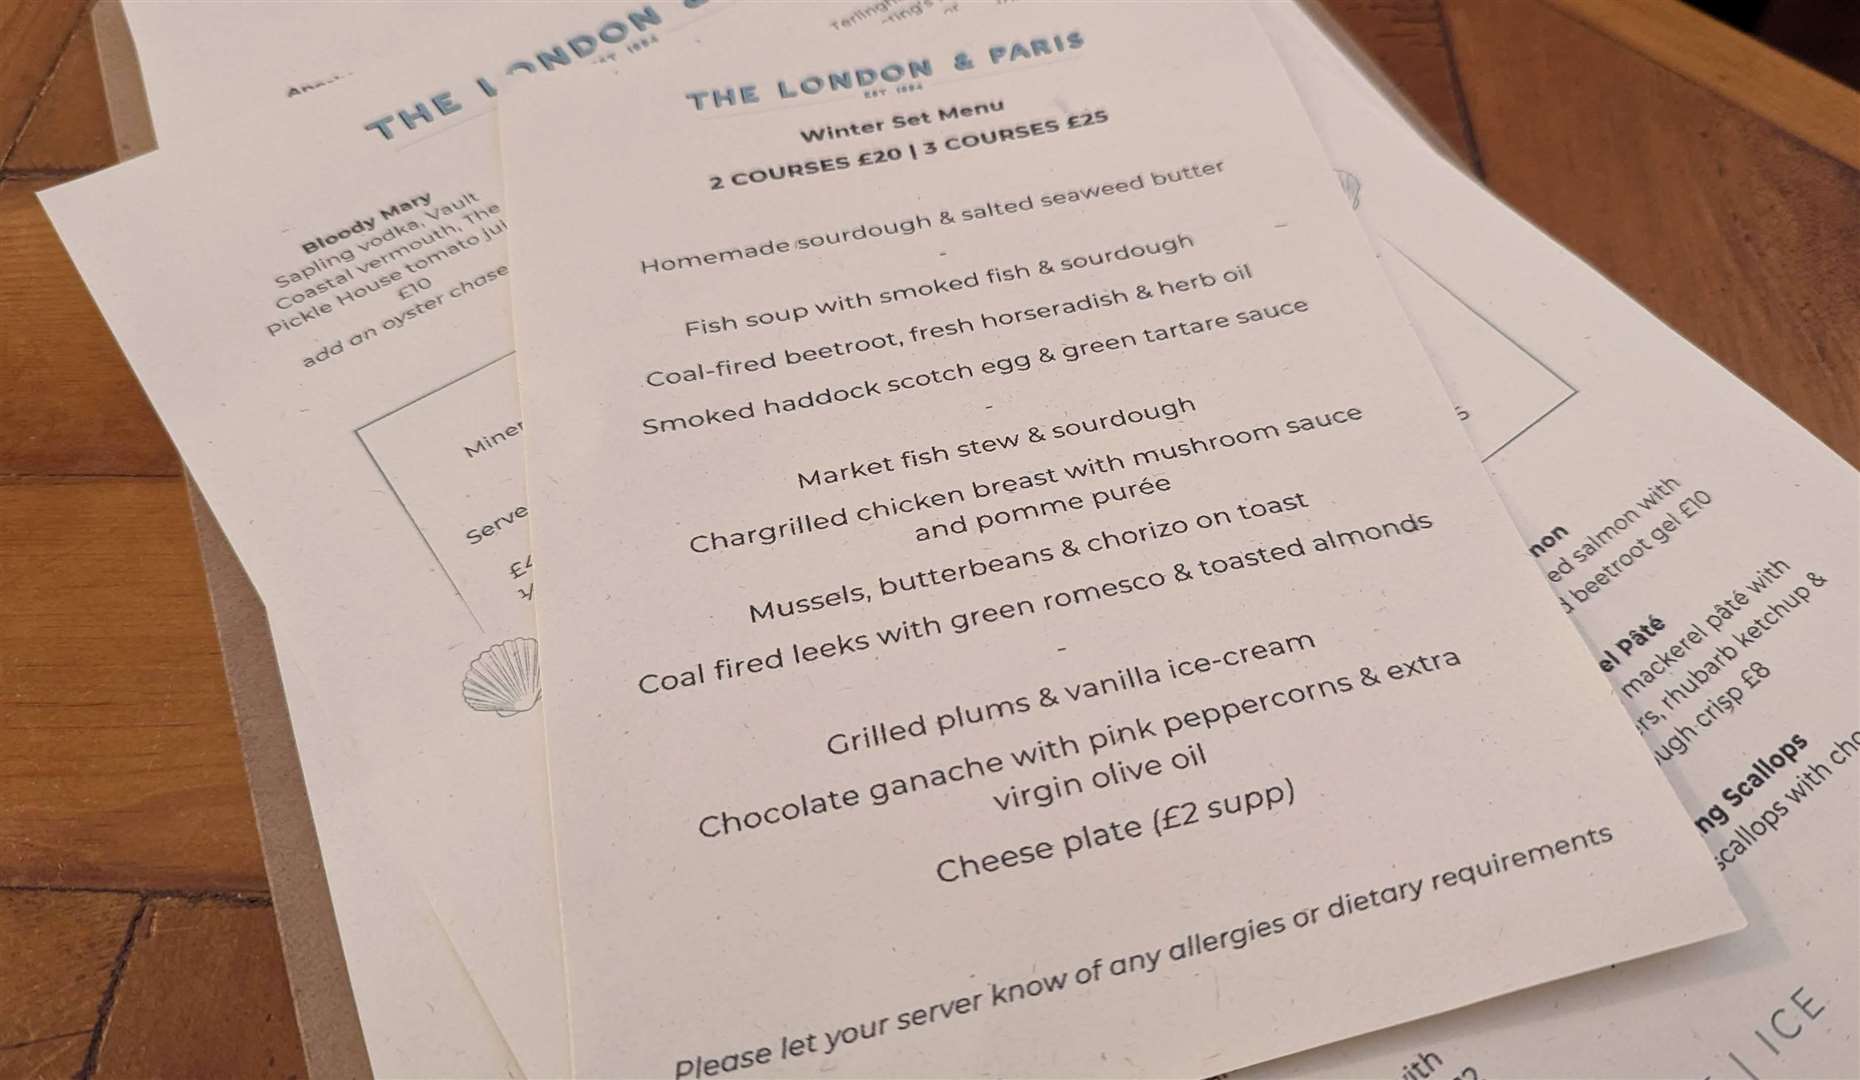 The set menu at the London and Paris seafood restaurant in Folkestone